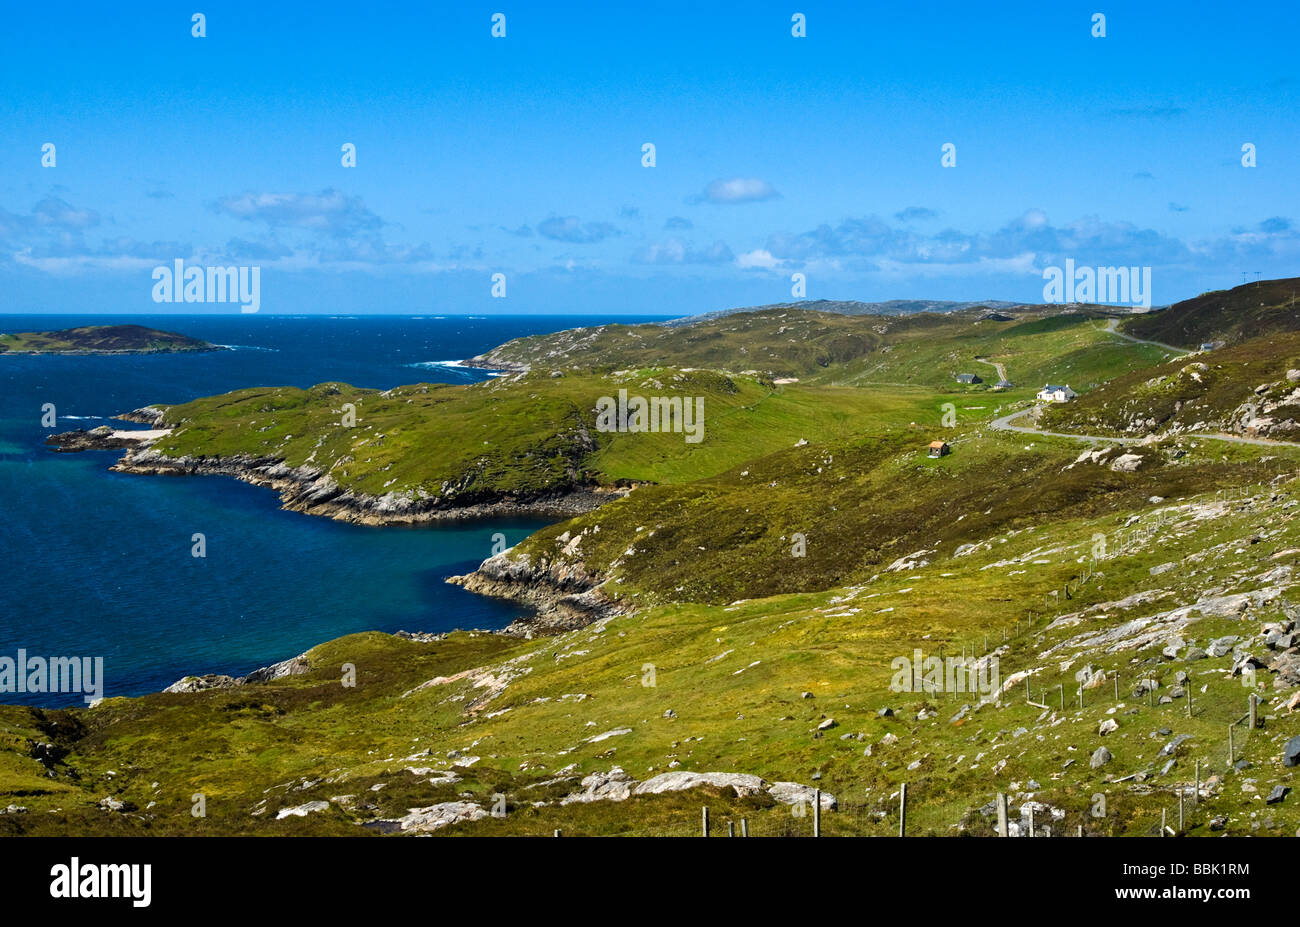 Wild and rocky coast line of North Harris Scotland as seen from the A887 with crofts Stock Photo